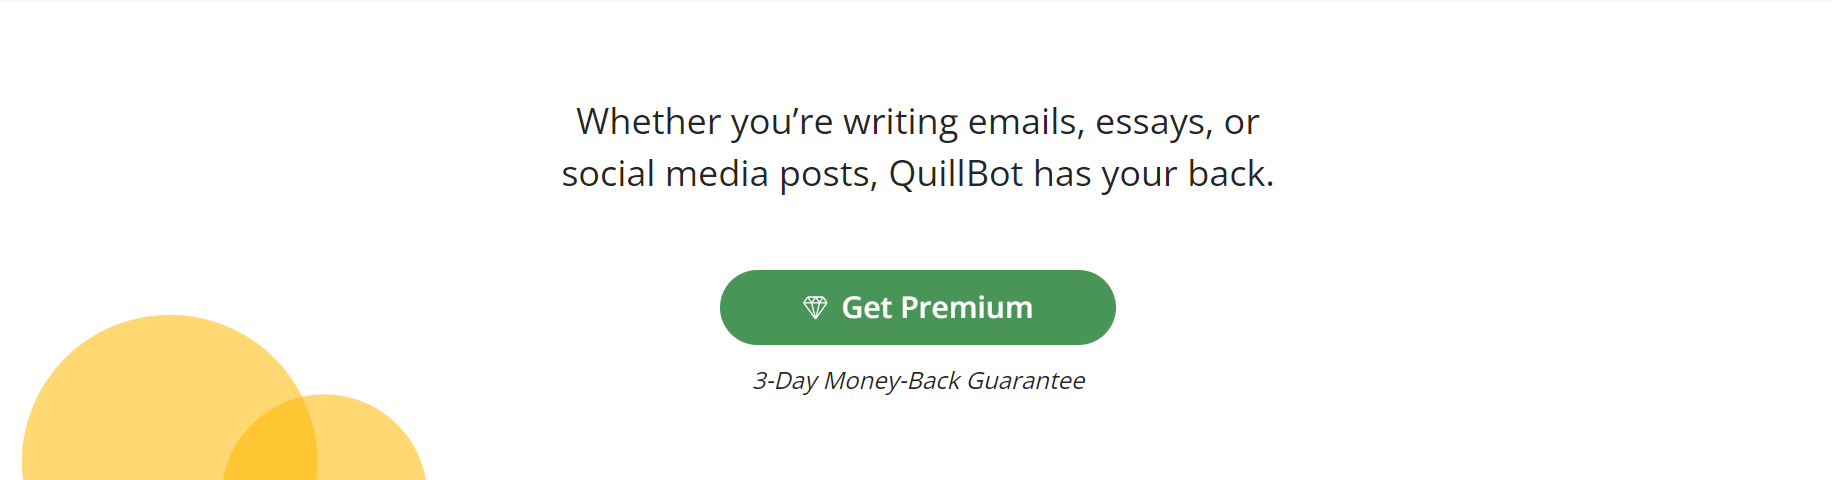 Quillbot Landing Page - "Whether you're writing emails, essays, or social media posts, Quillbot has your back."